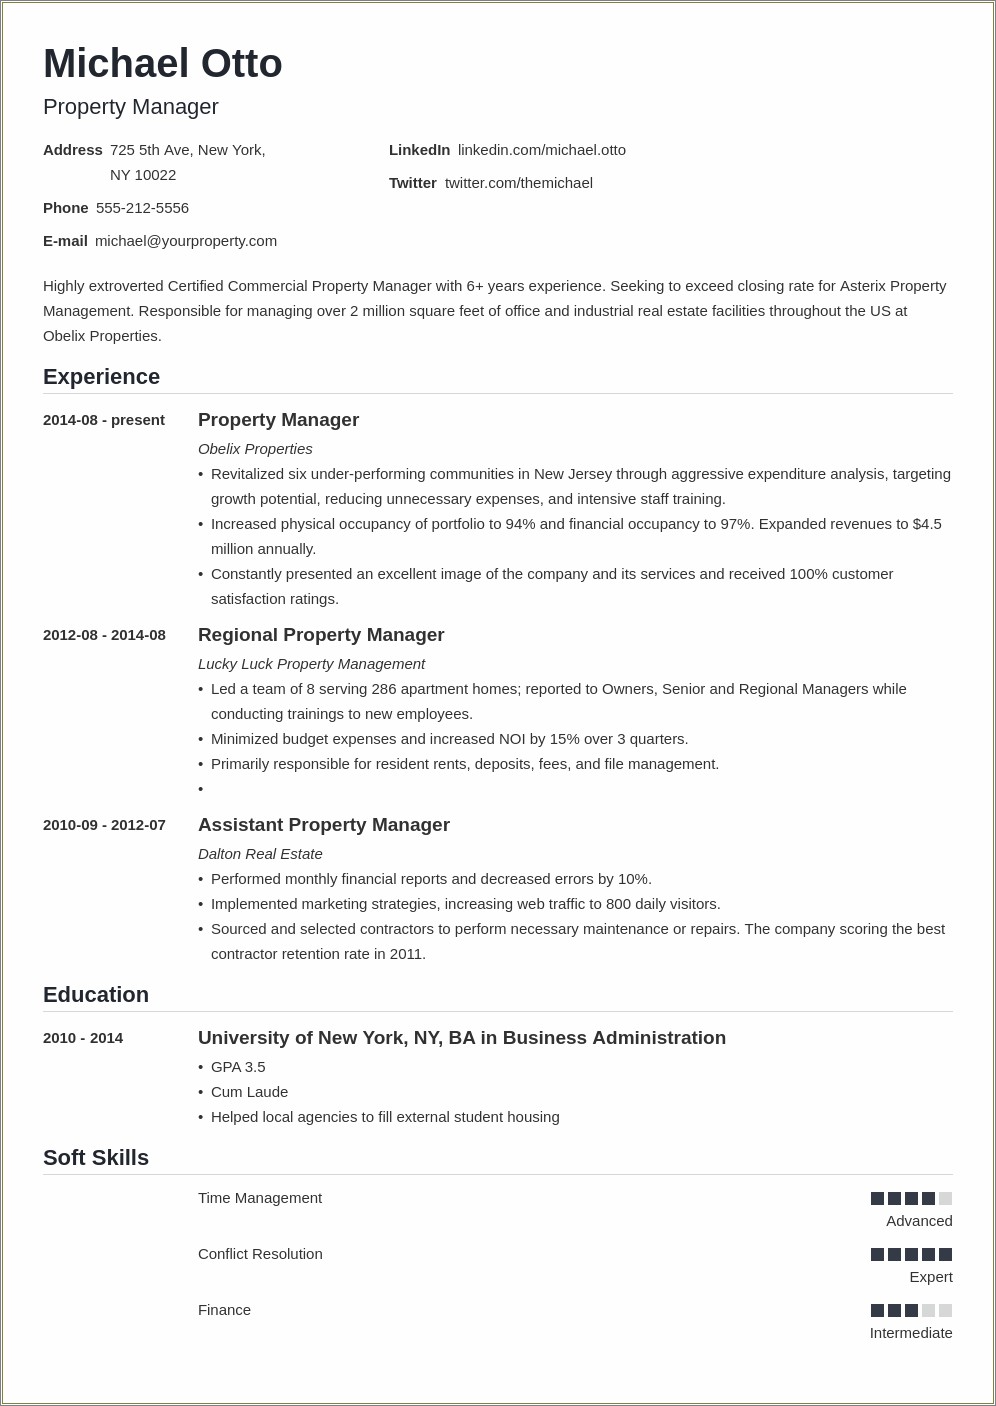 Sample Resume And Cover Letter For Property Manager